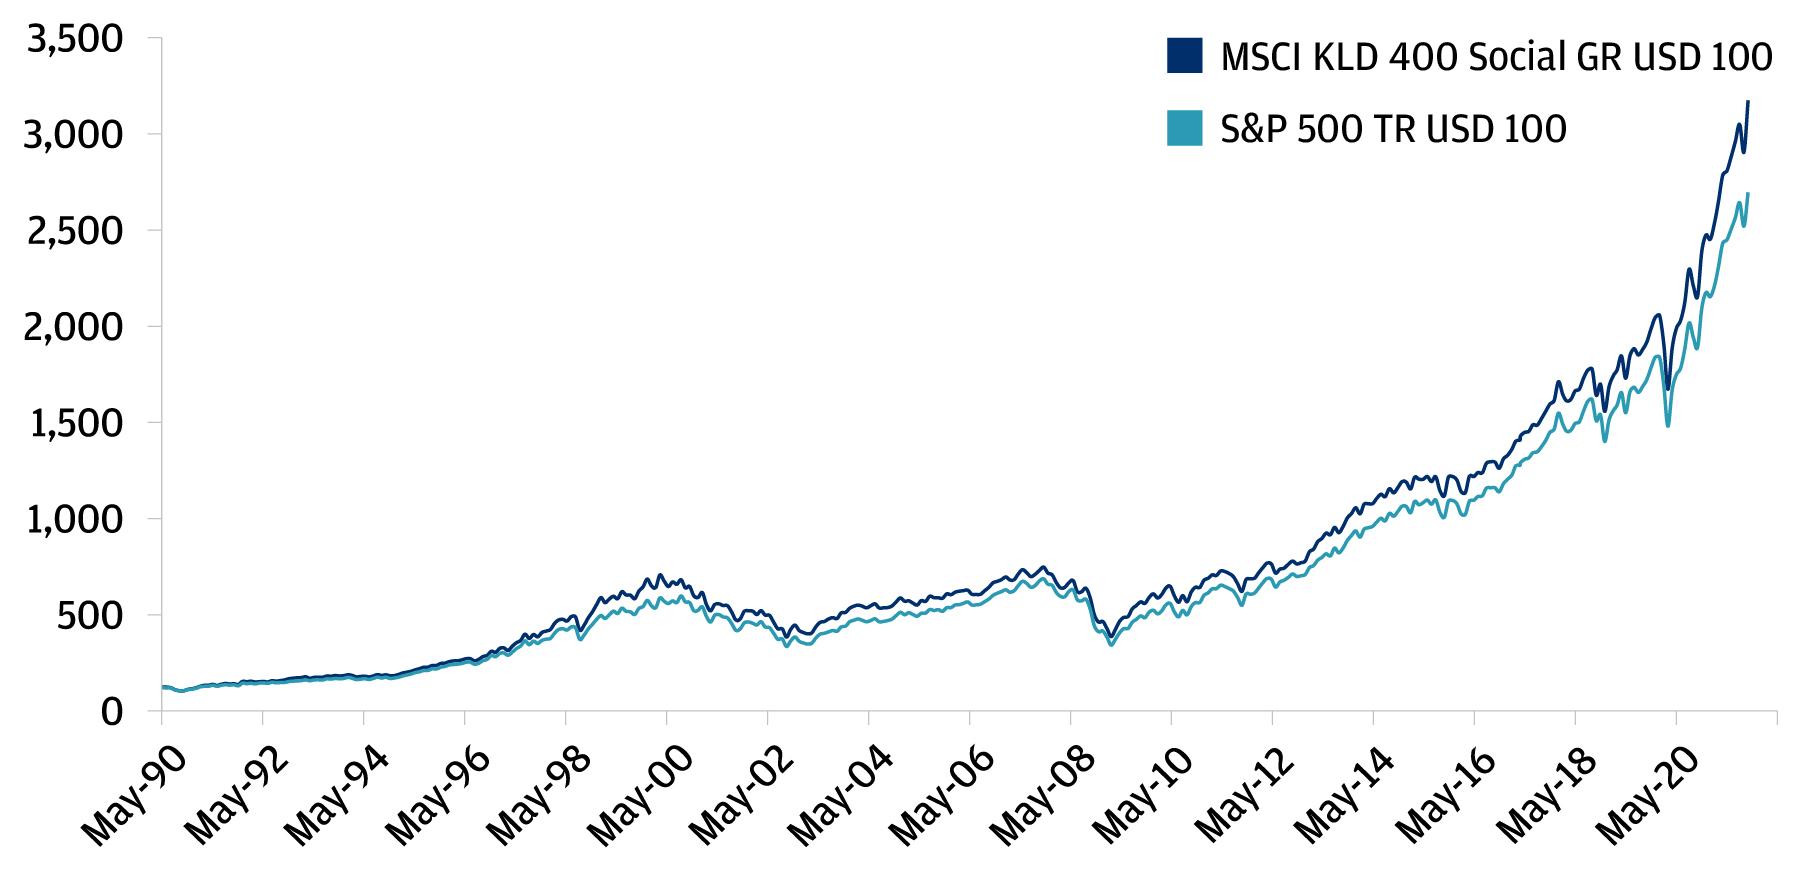 This chart shows performance of the MSCI KLD 400 Social Index and S&P 500 TR Index from 5/1/1990 through 10/29/2021.